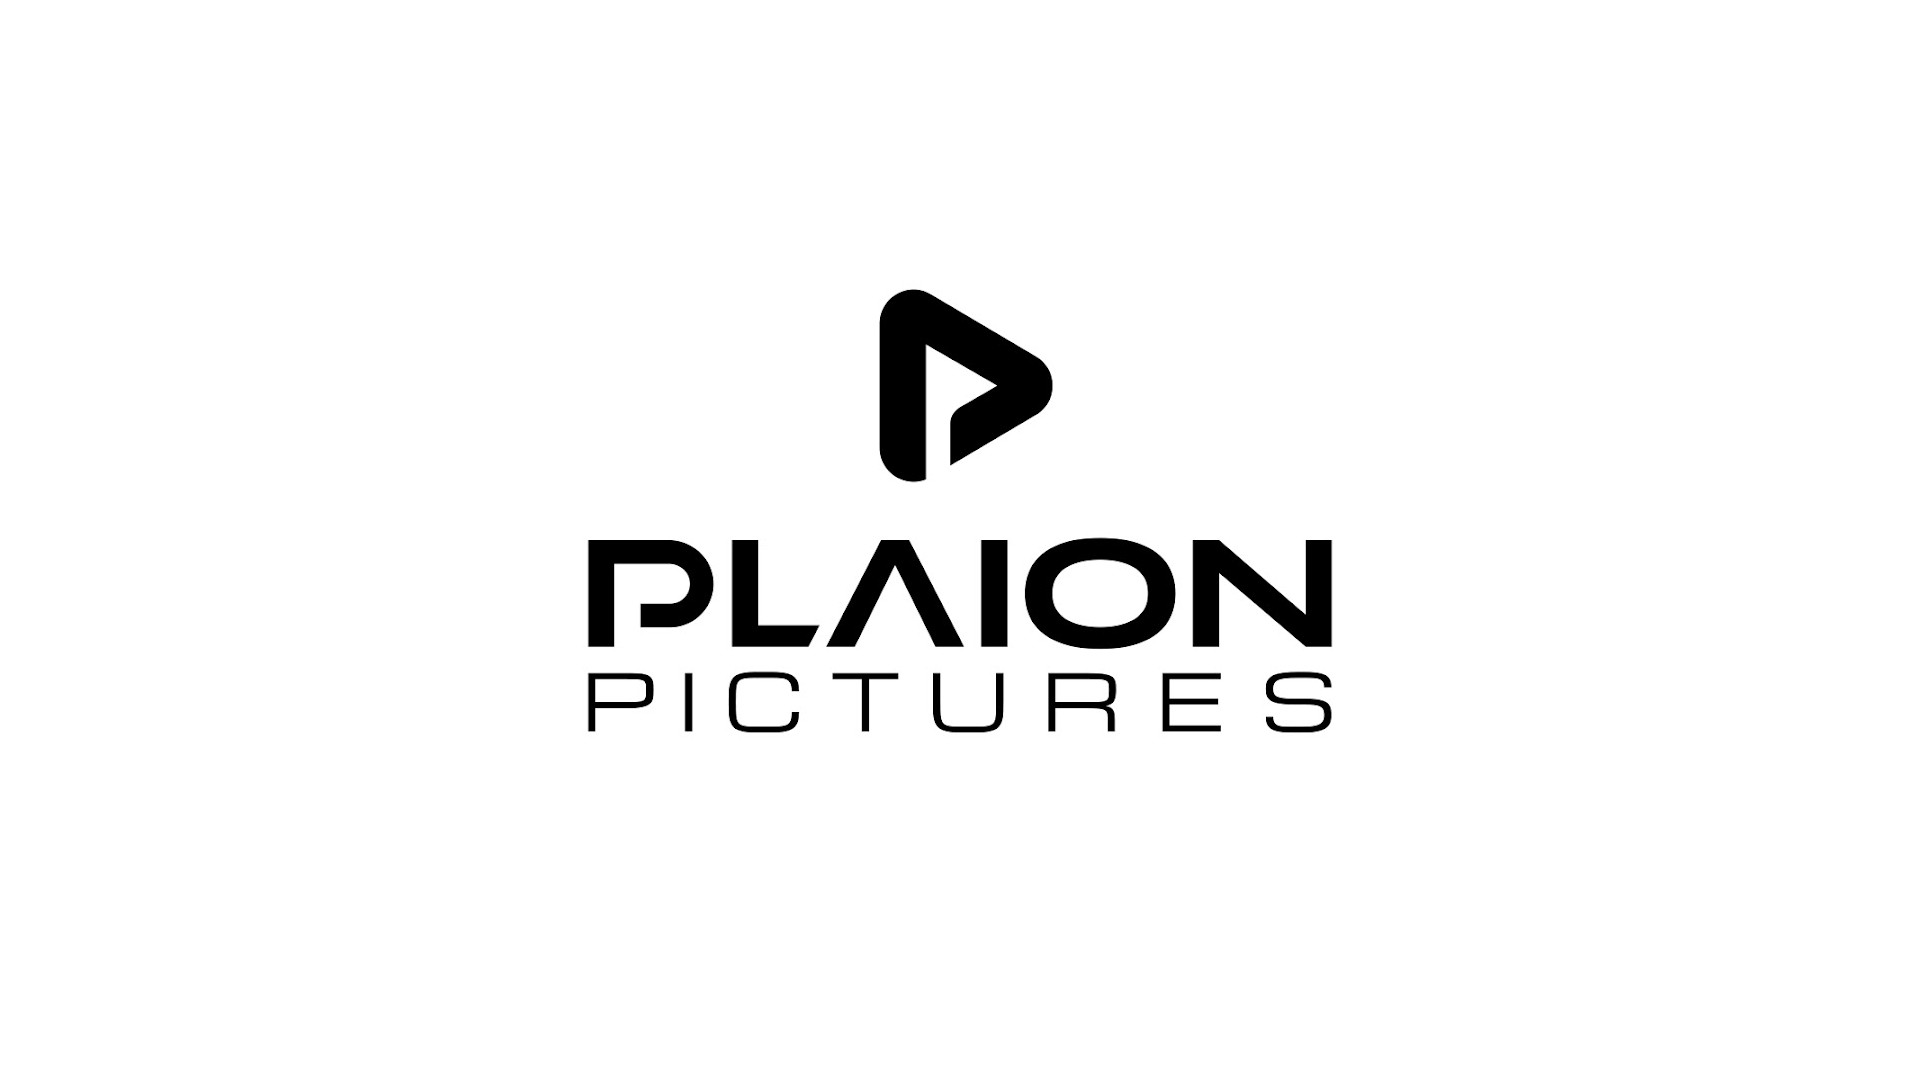 Plaion Pictures: the news coming to Home Video in April 2023!